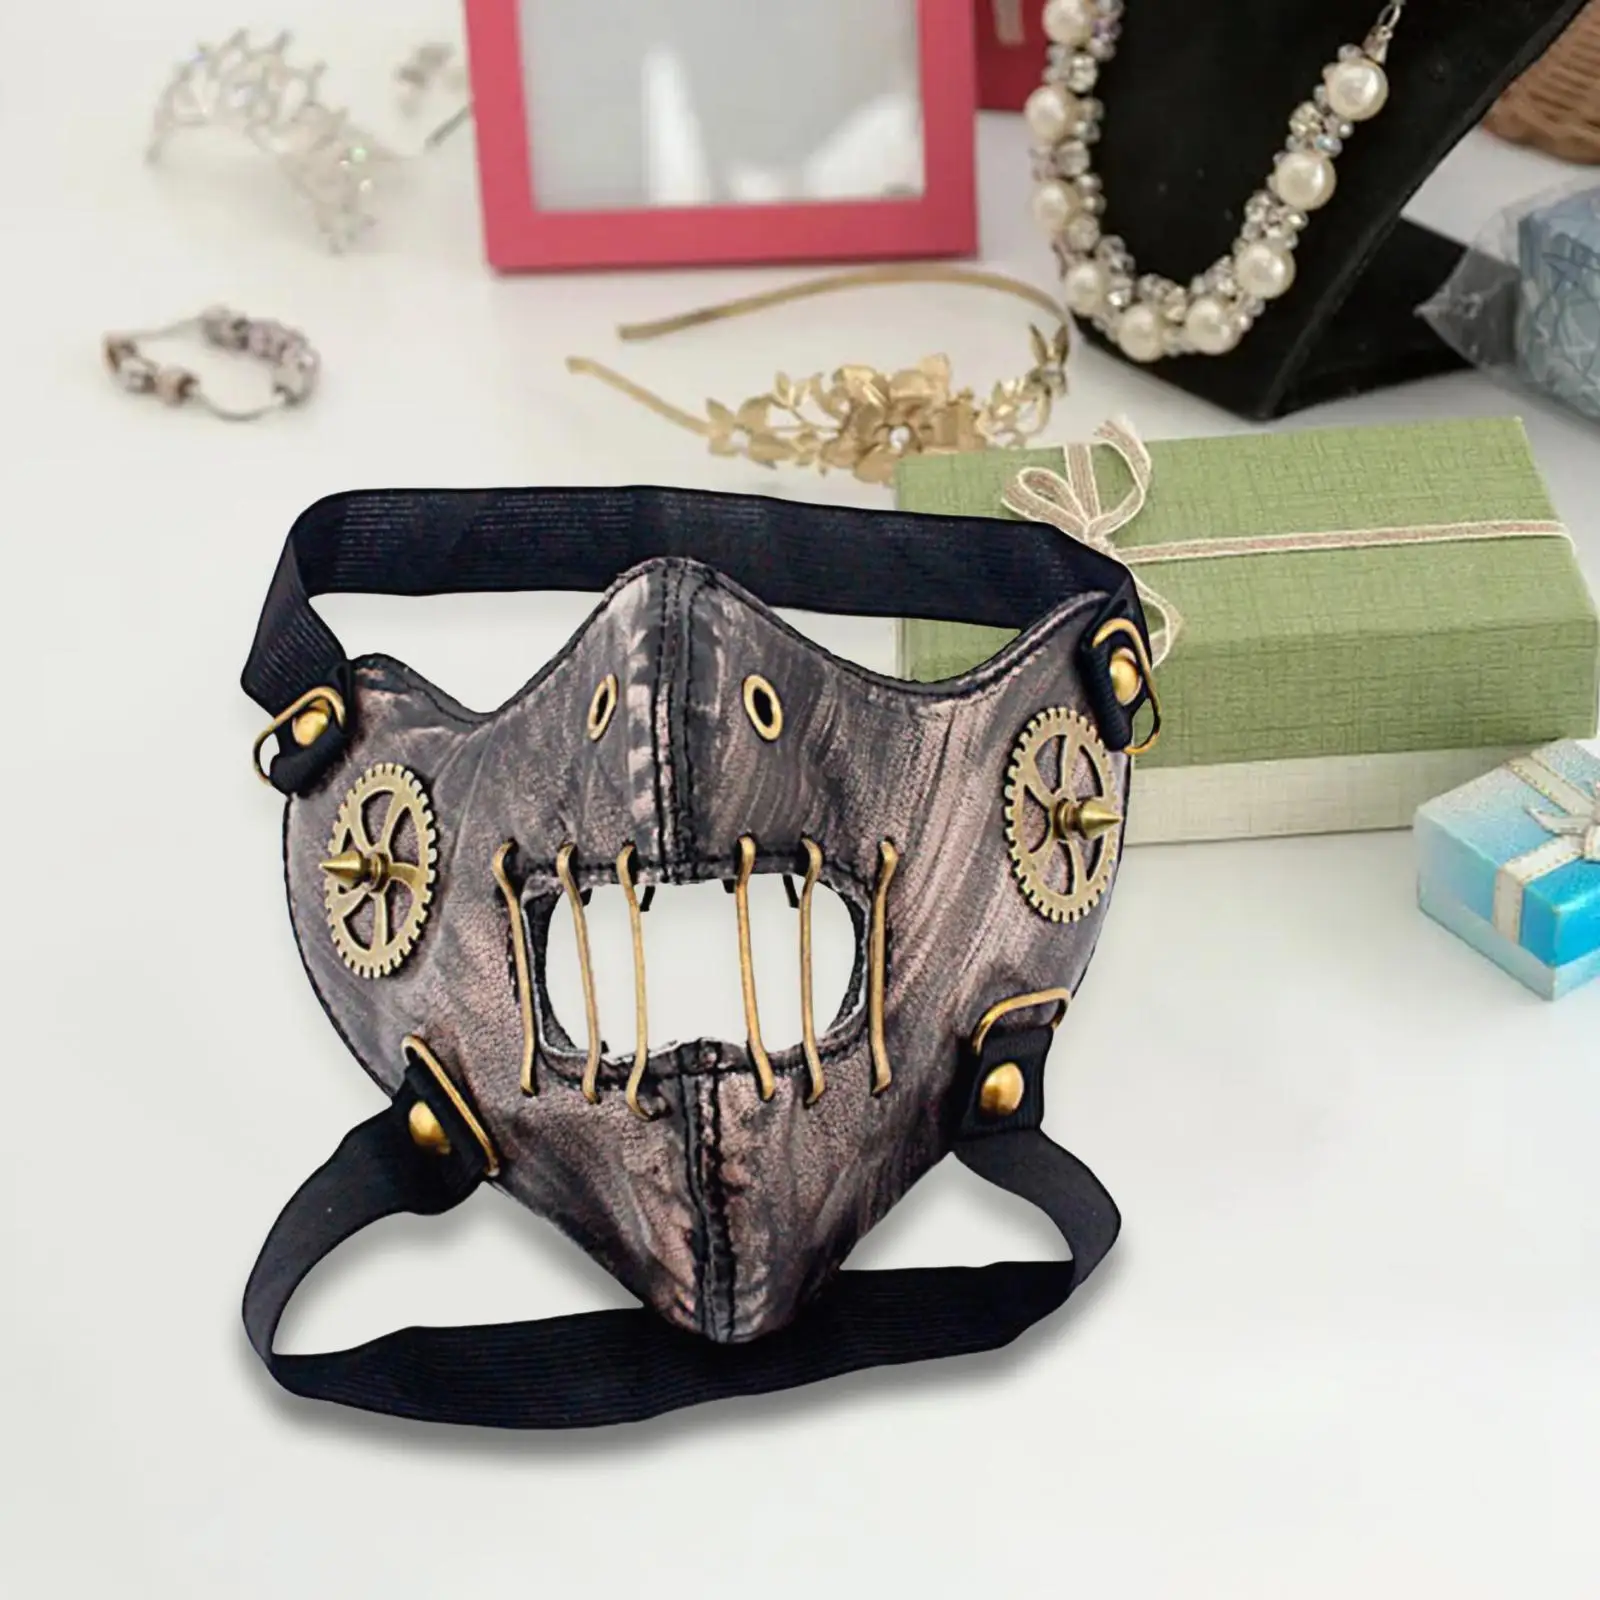 Steampunk Mask Gothic Dustproof Half Face Mask for Masquerade Bar Party